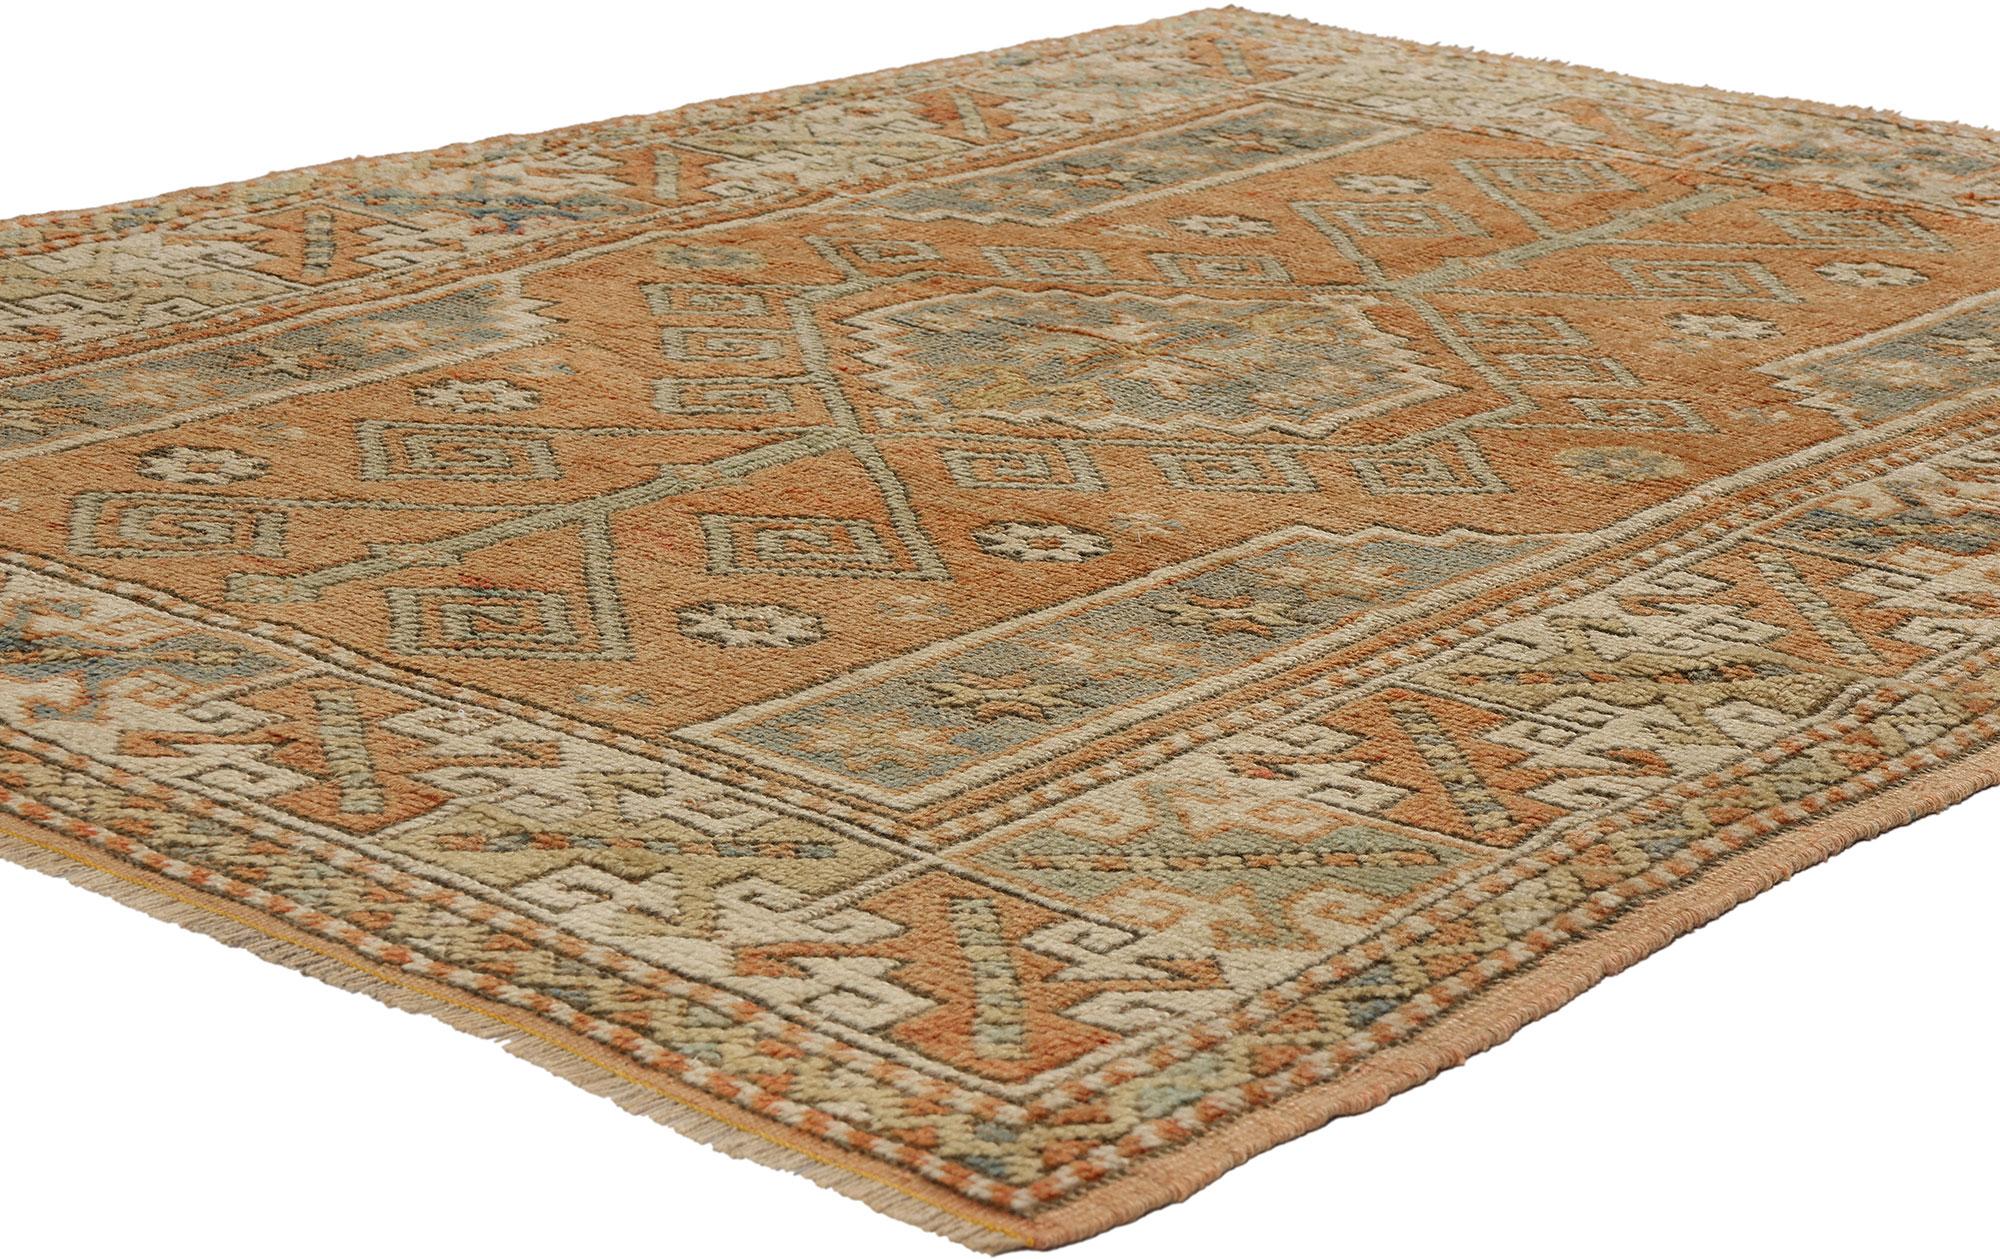 53901 Vintage Orange Turkish Oushak Rug, 04'04 x 05'08. Blending rustic Bohemian allure with nomadic charm, this hand-knotted wool Turkish Oushak rug enthralls with its earthy tones and intricate tribal motifs. Anchoring its design is a captivating